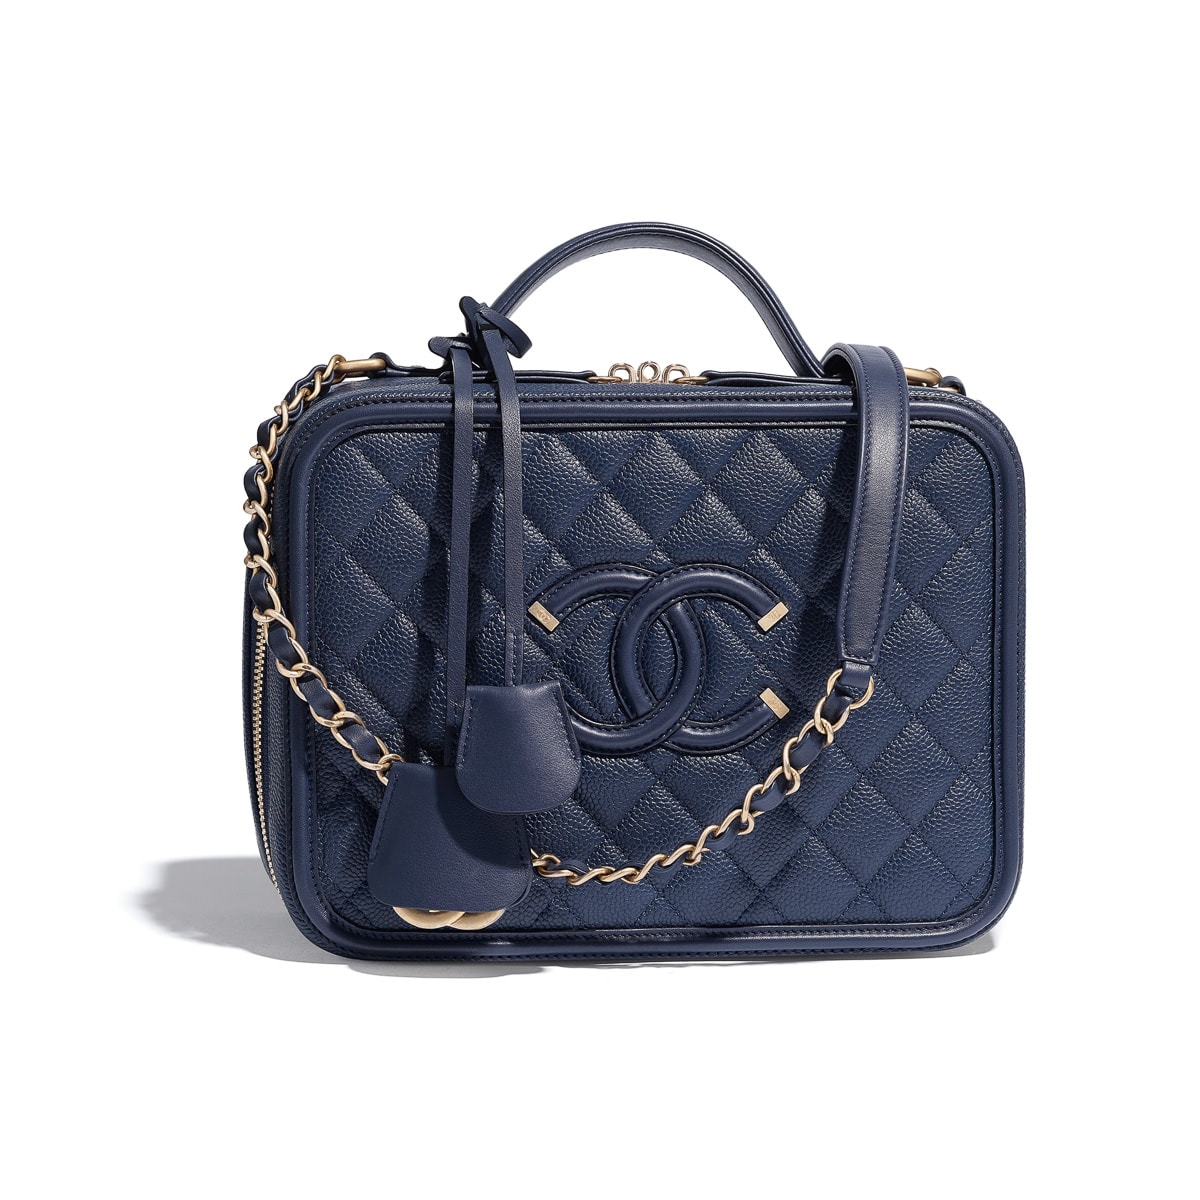 Chanel Gabrielle Bag 2019 Price | Jaguar Clubs of North America